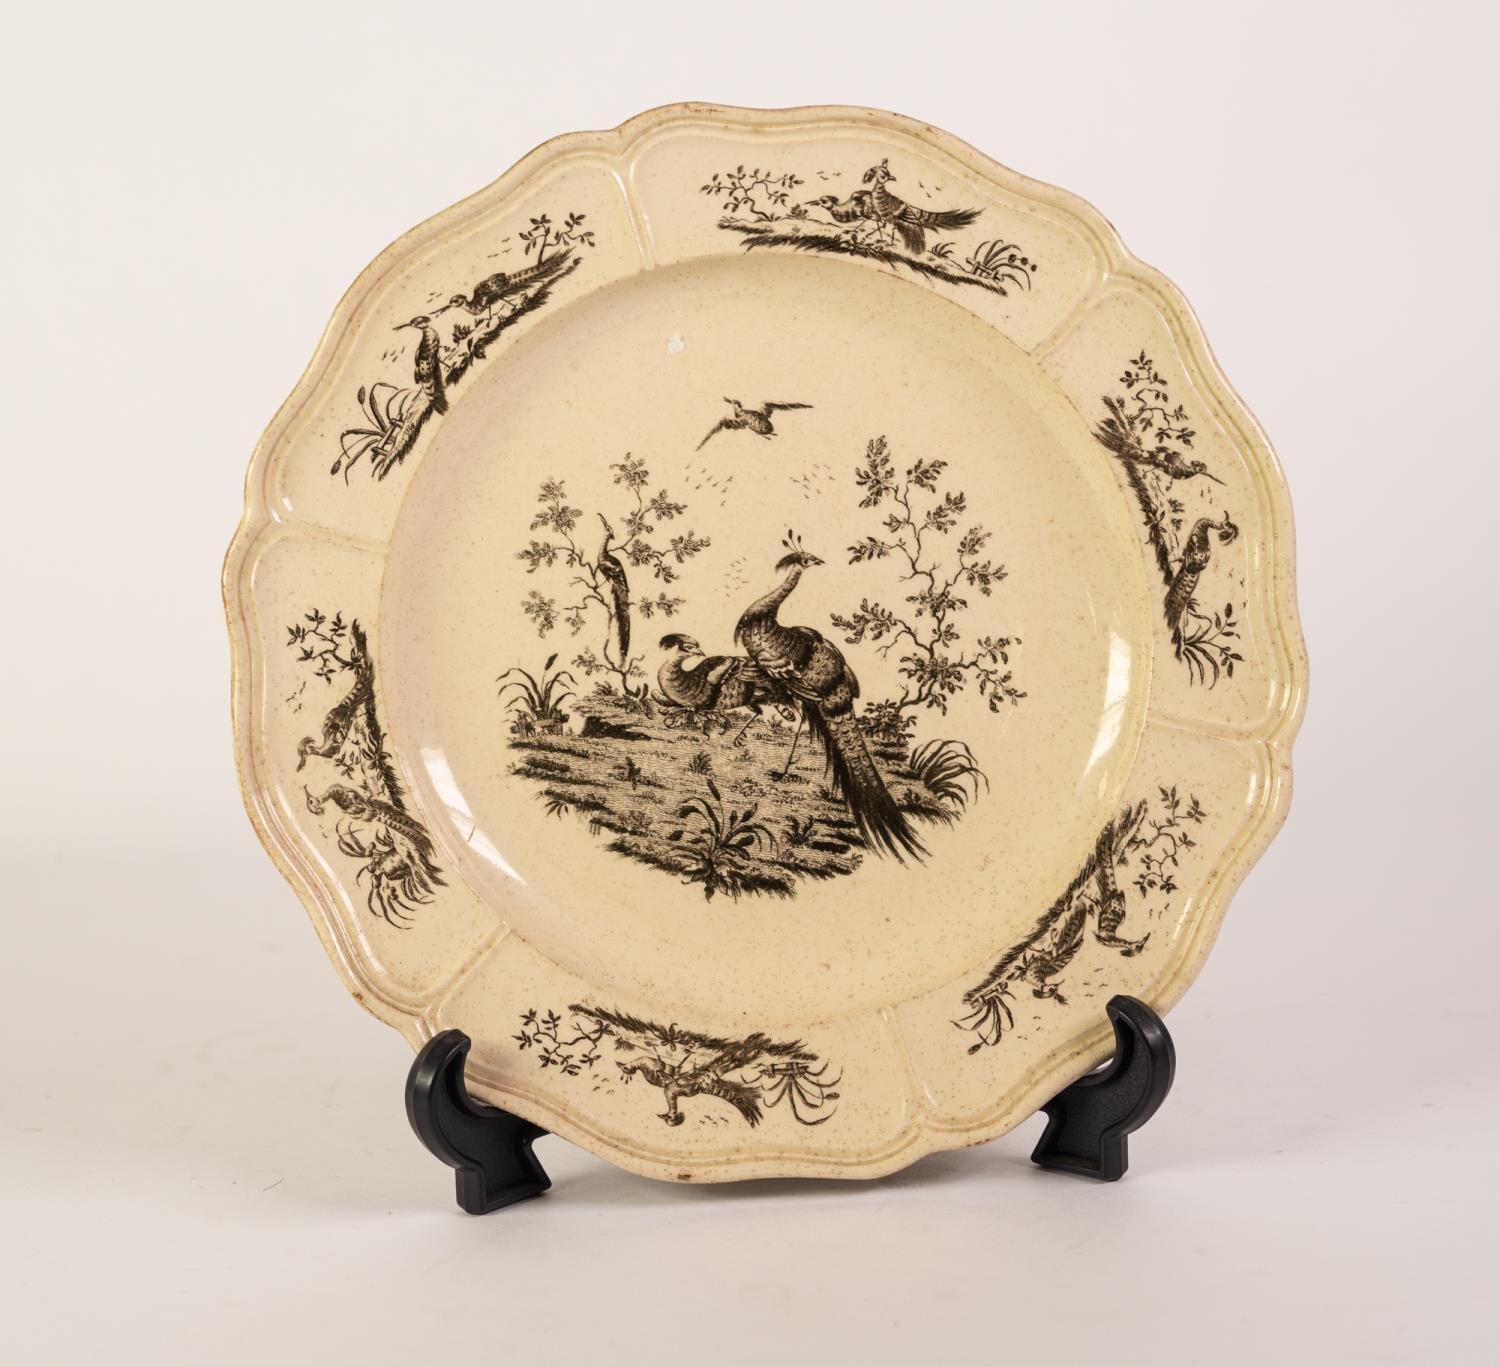 A CIRCA 1775 LIVERPOOL OR STAFFORDSHIRE CREAMWARE SCALLOPED PLATE, transfer printed in black with